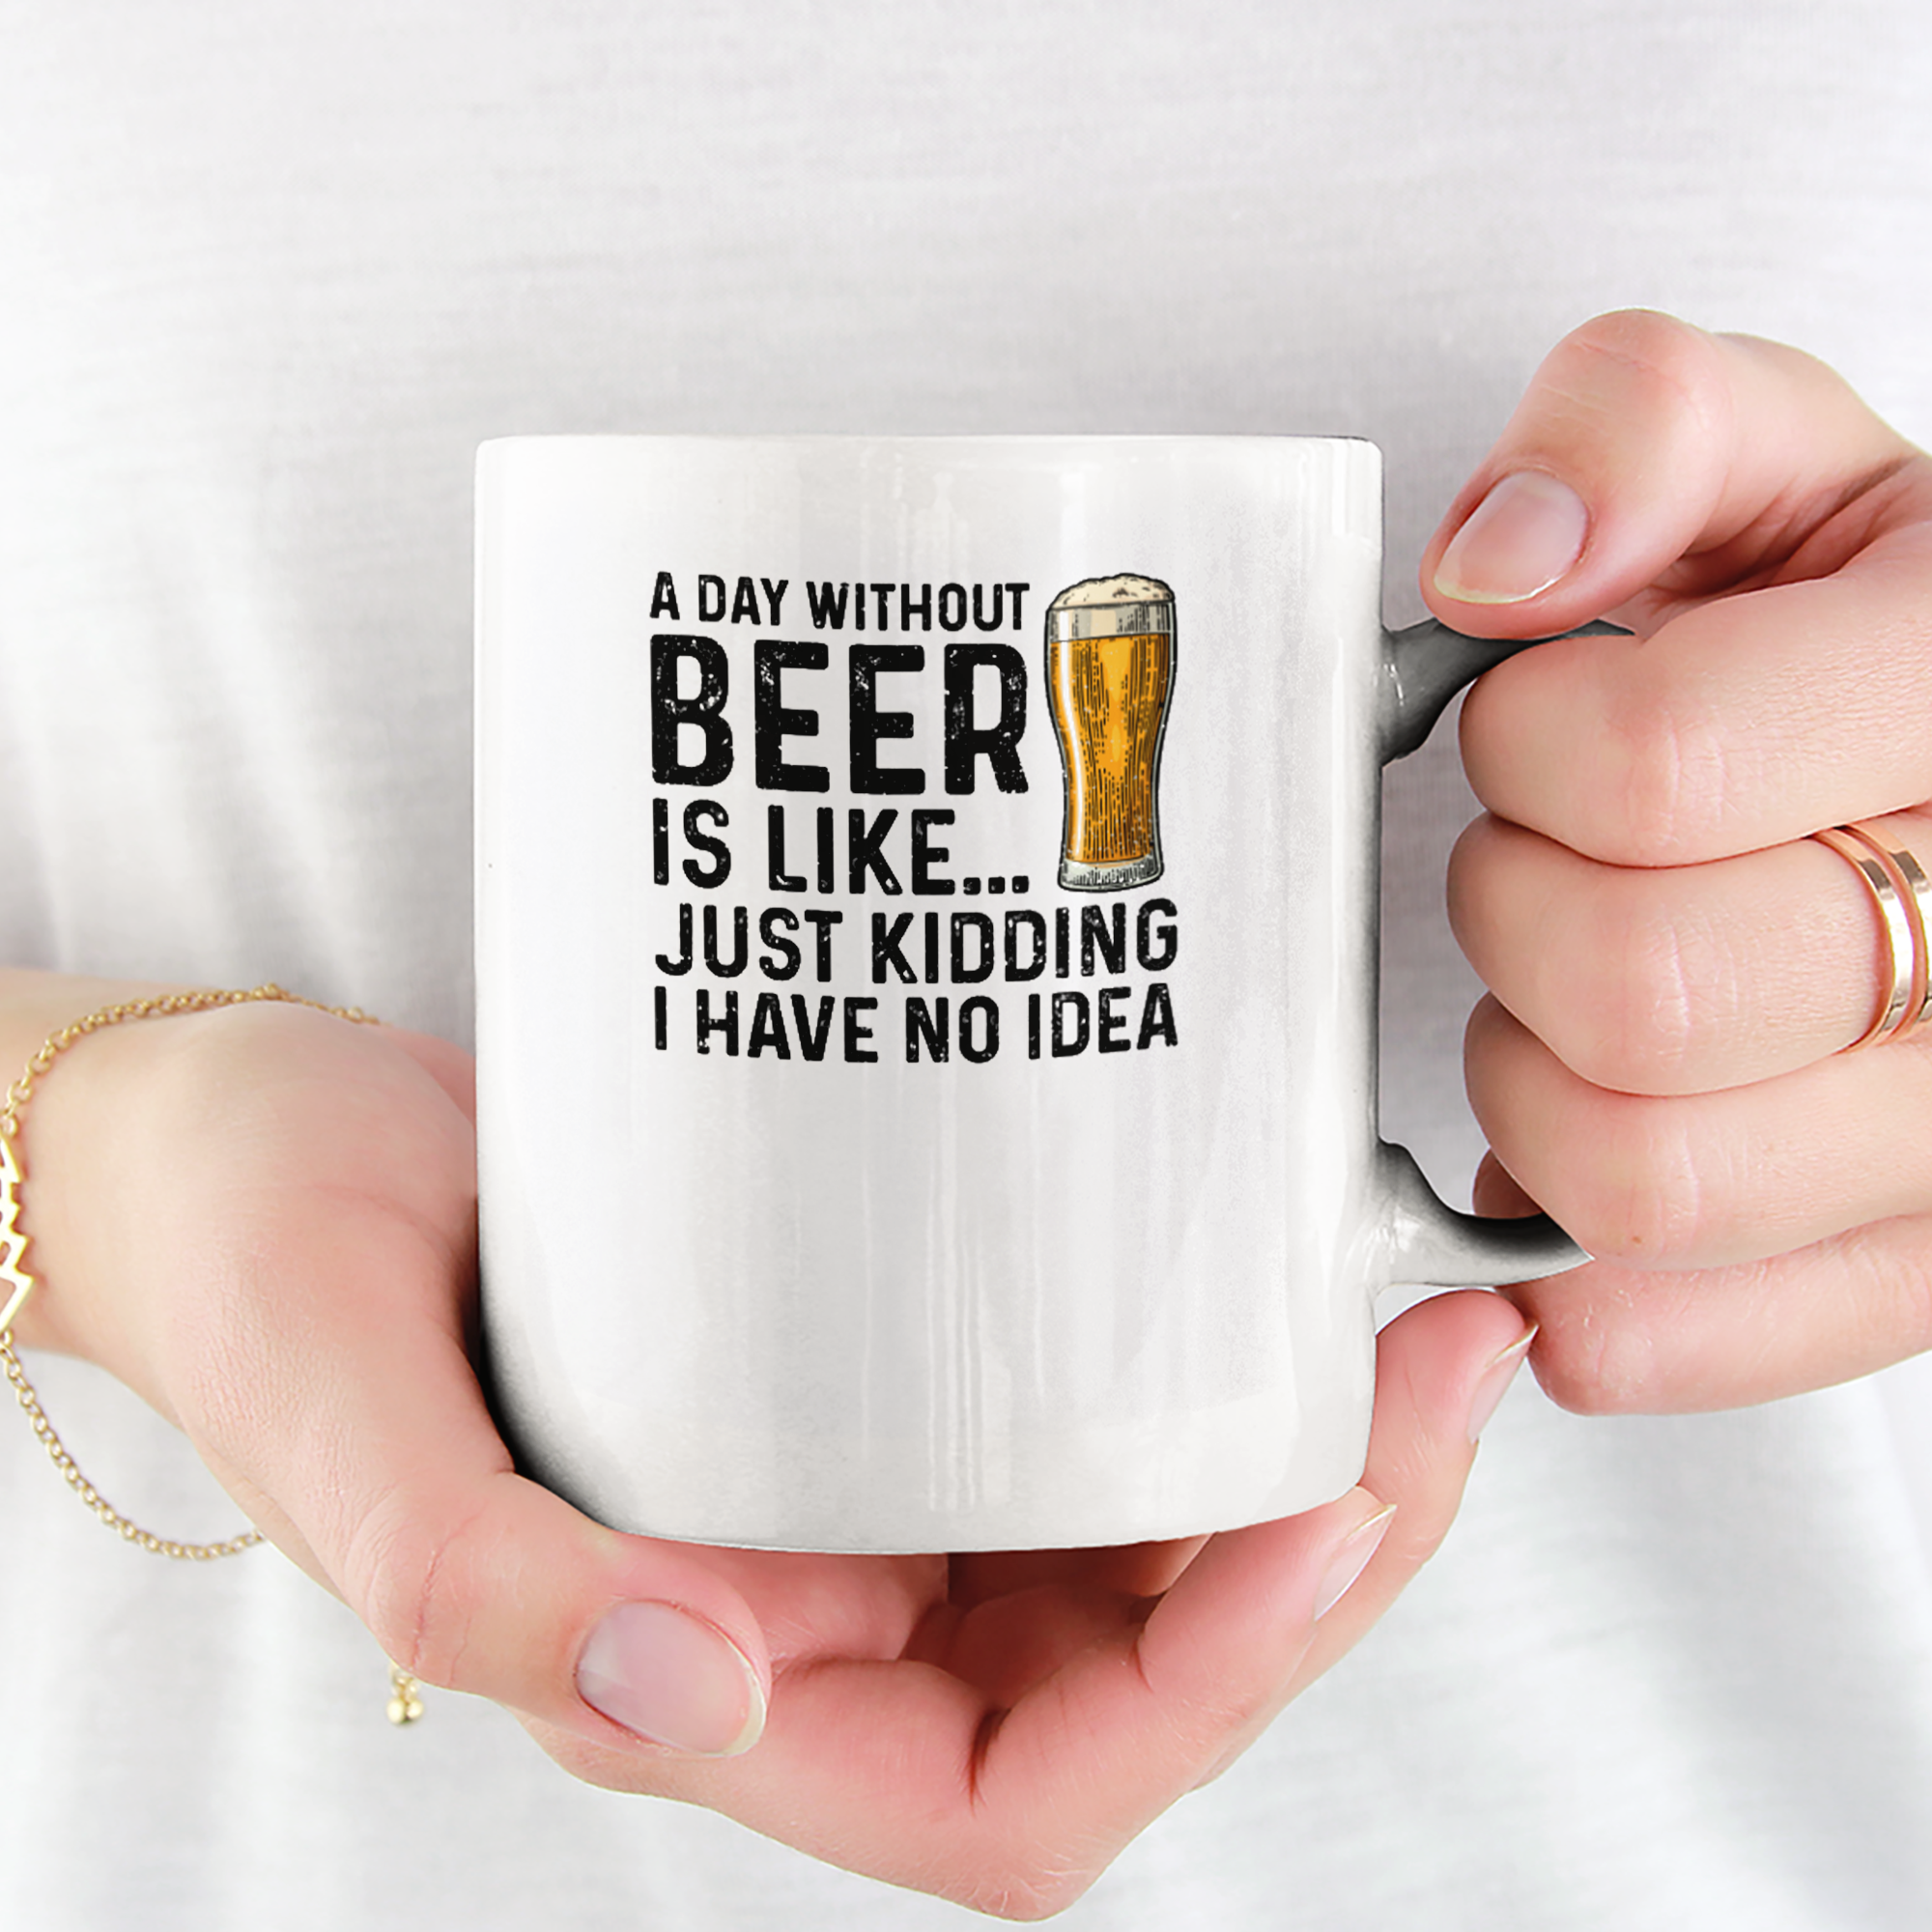 A Day Without Beer Is Like Just Kidding I Have No Idea Tasse - DESIGNSBYJNK5.COM